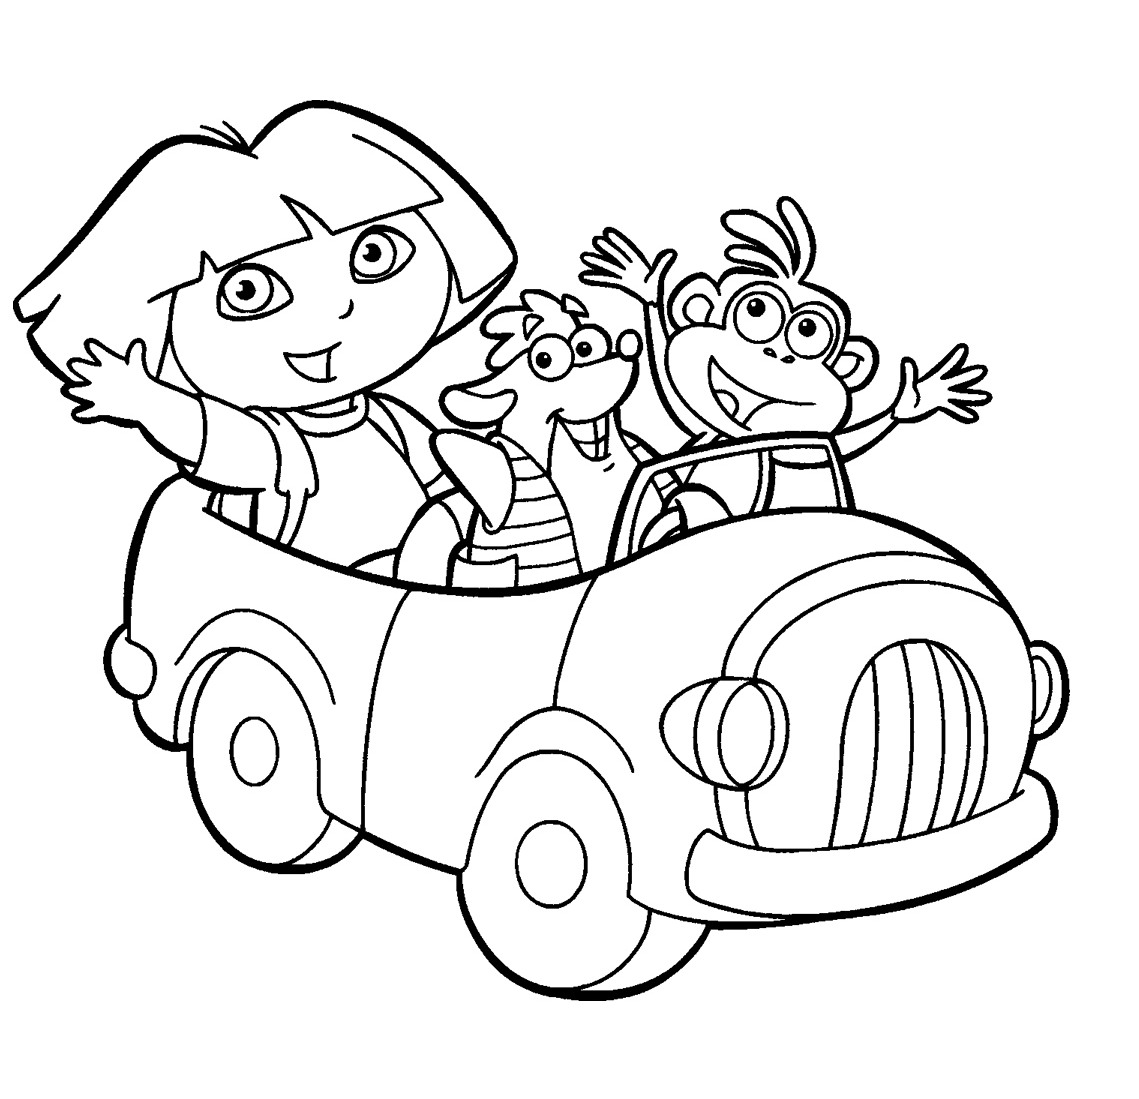 dora backpack coloring page